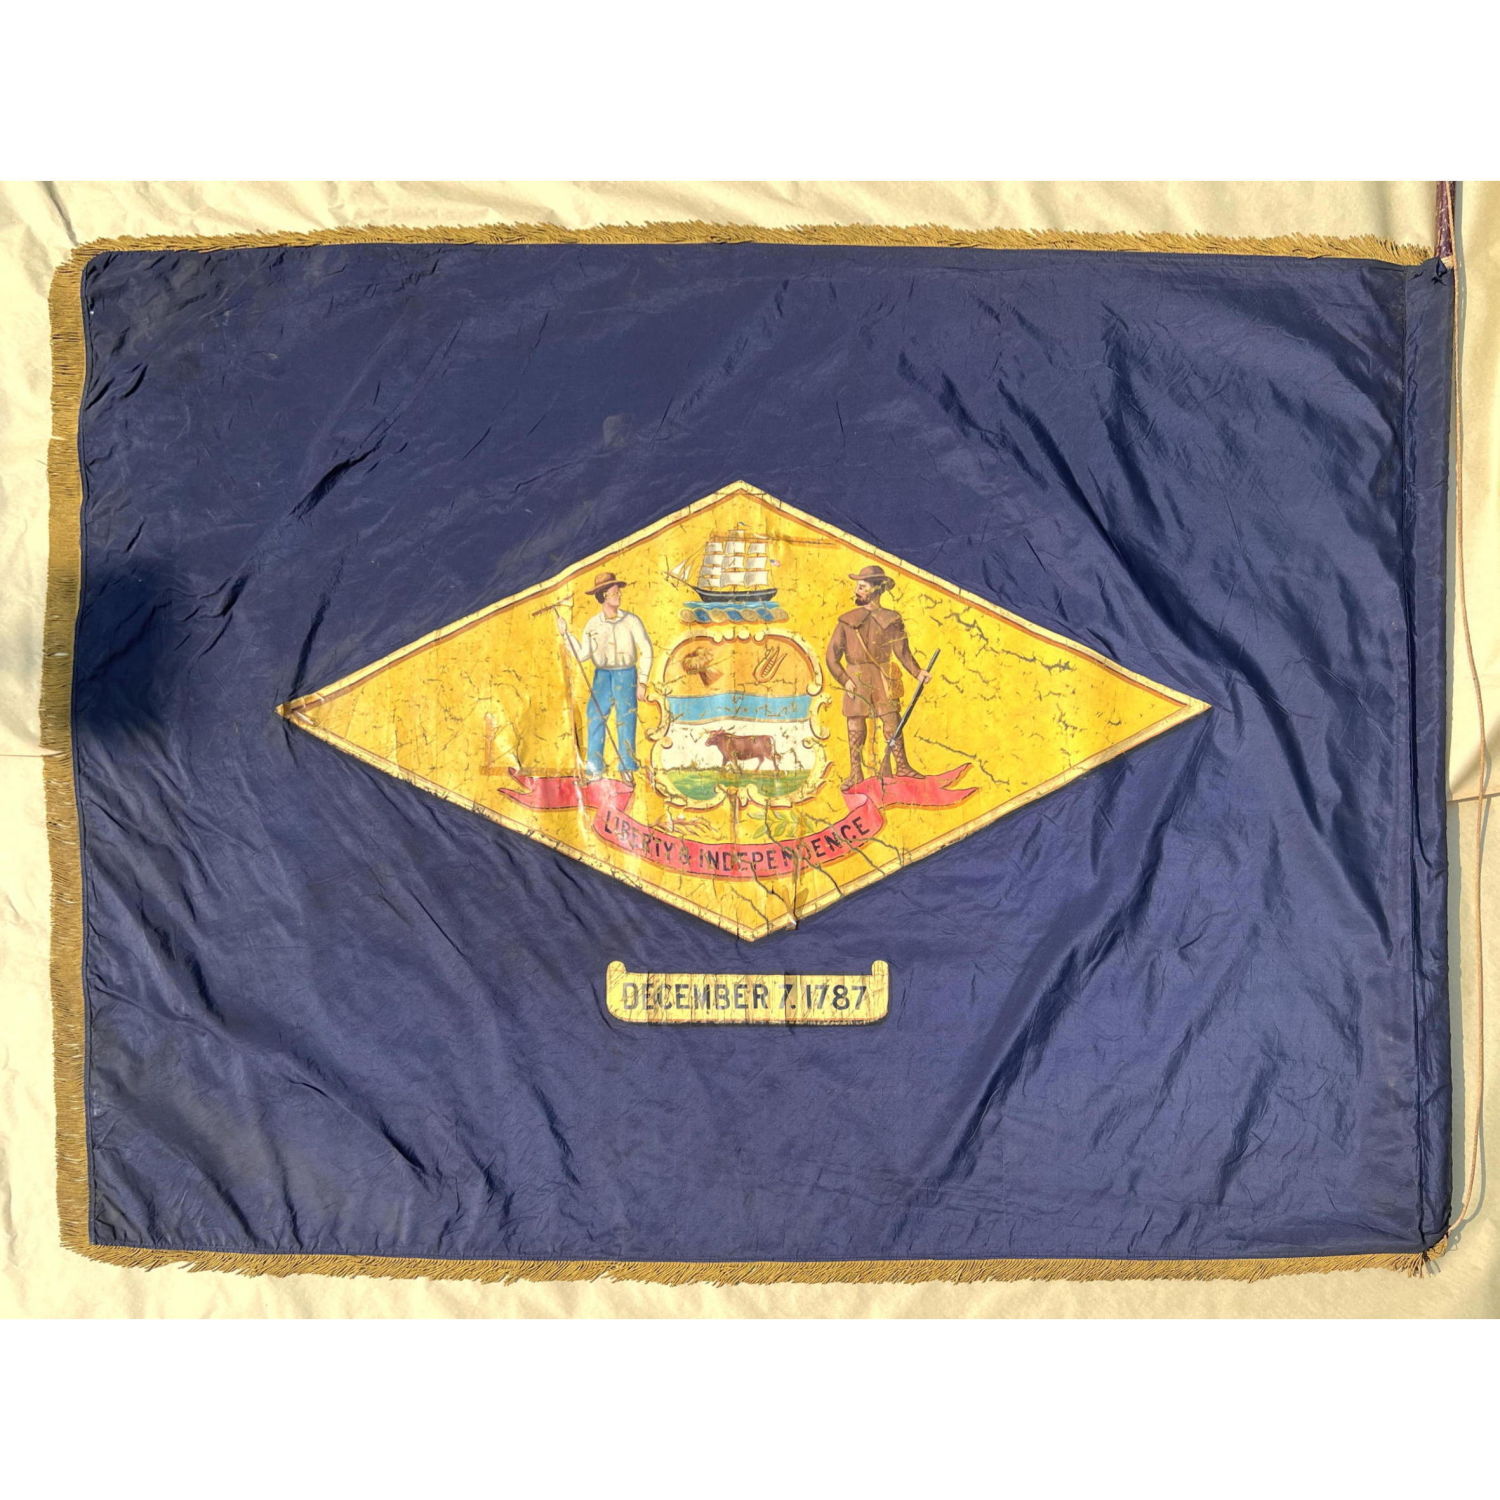 Early Delaware state flag from